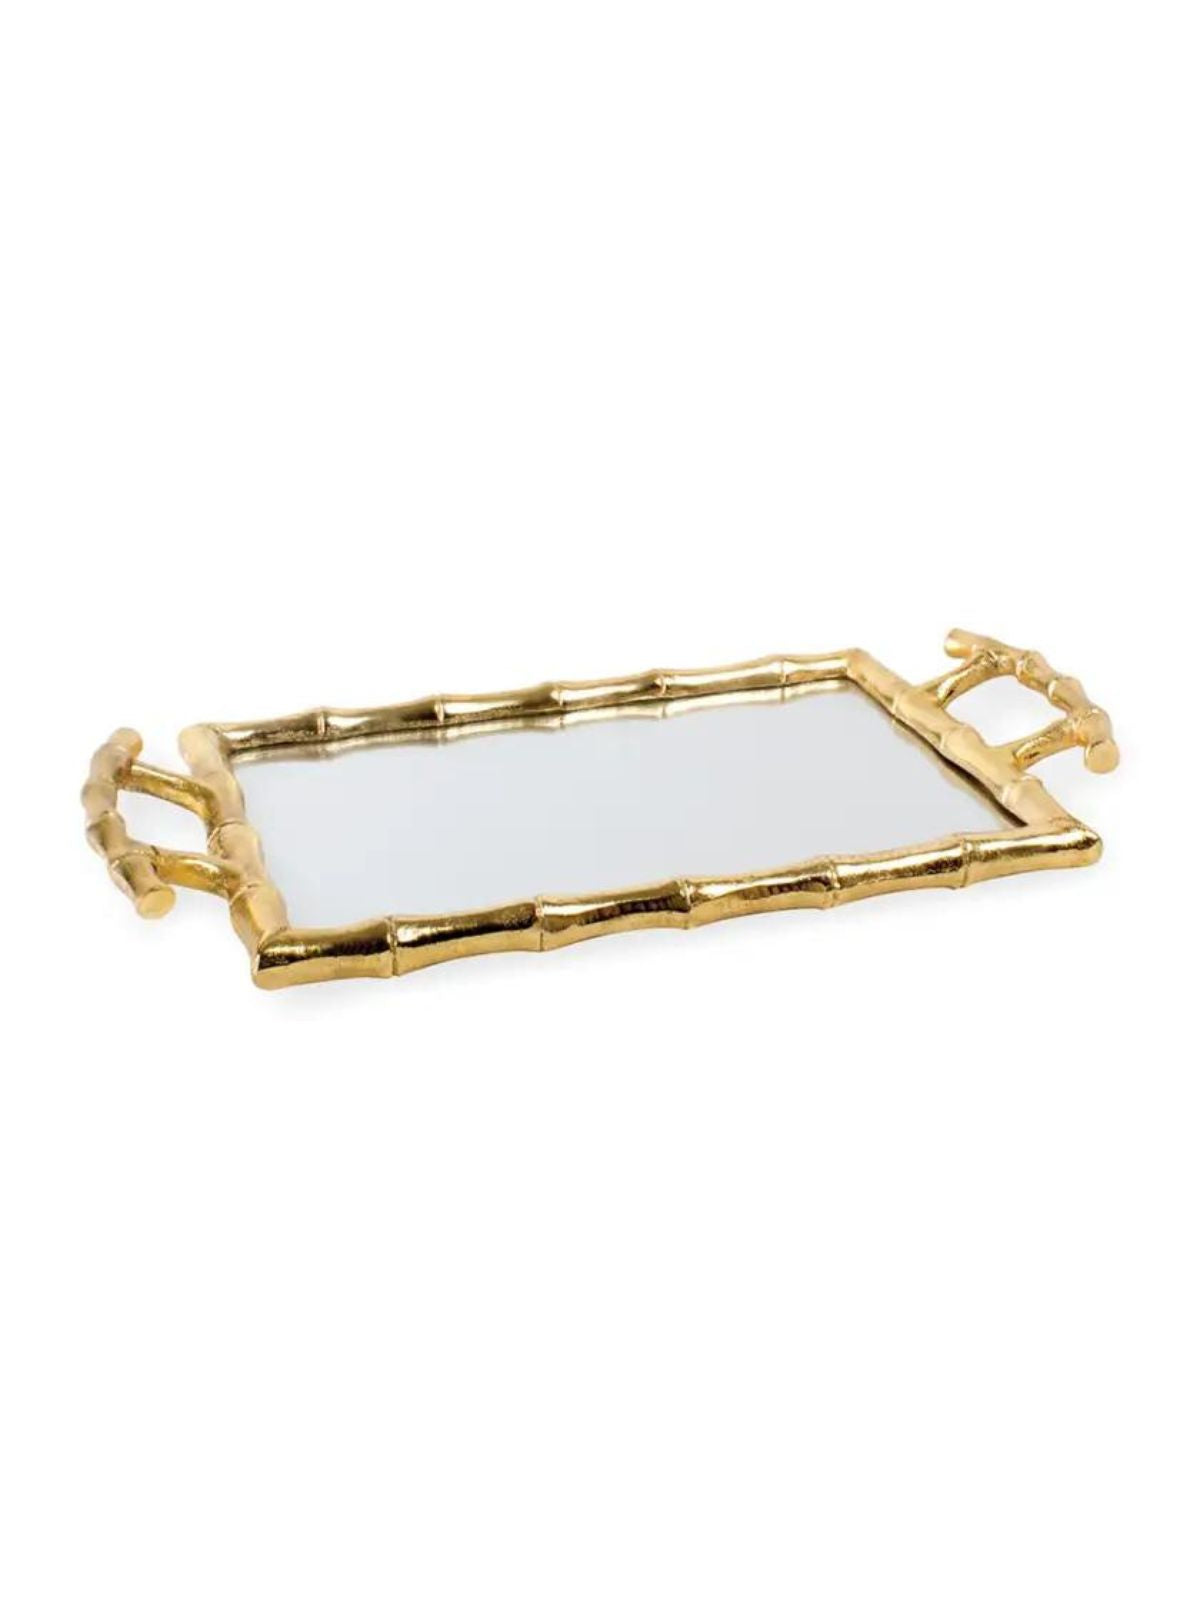 Gold Metal Bamboo Designed Vanity Tray with Mirrored Base.